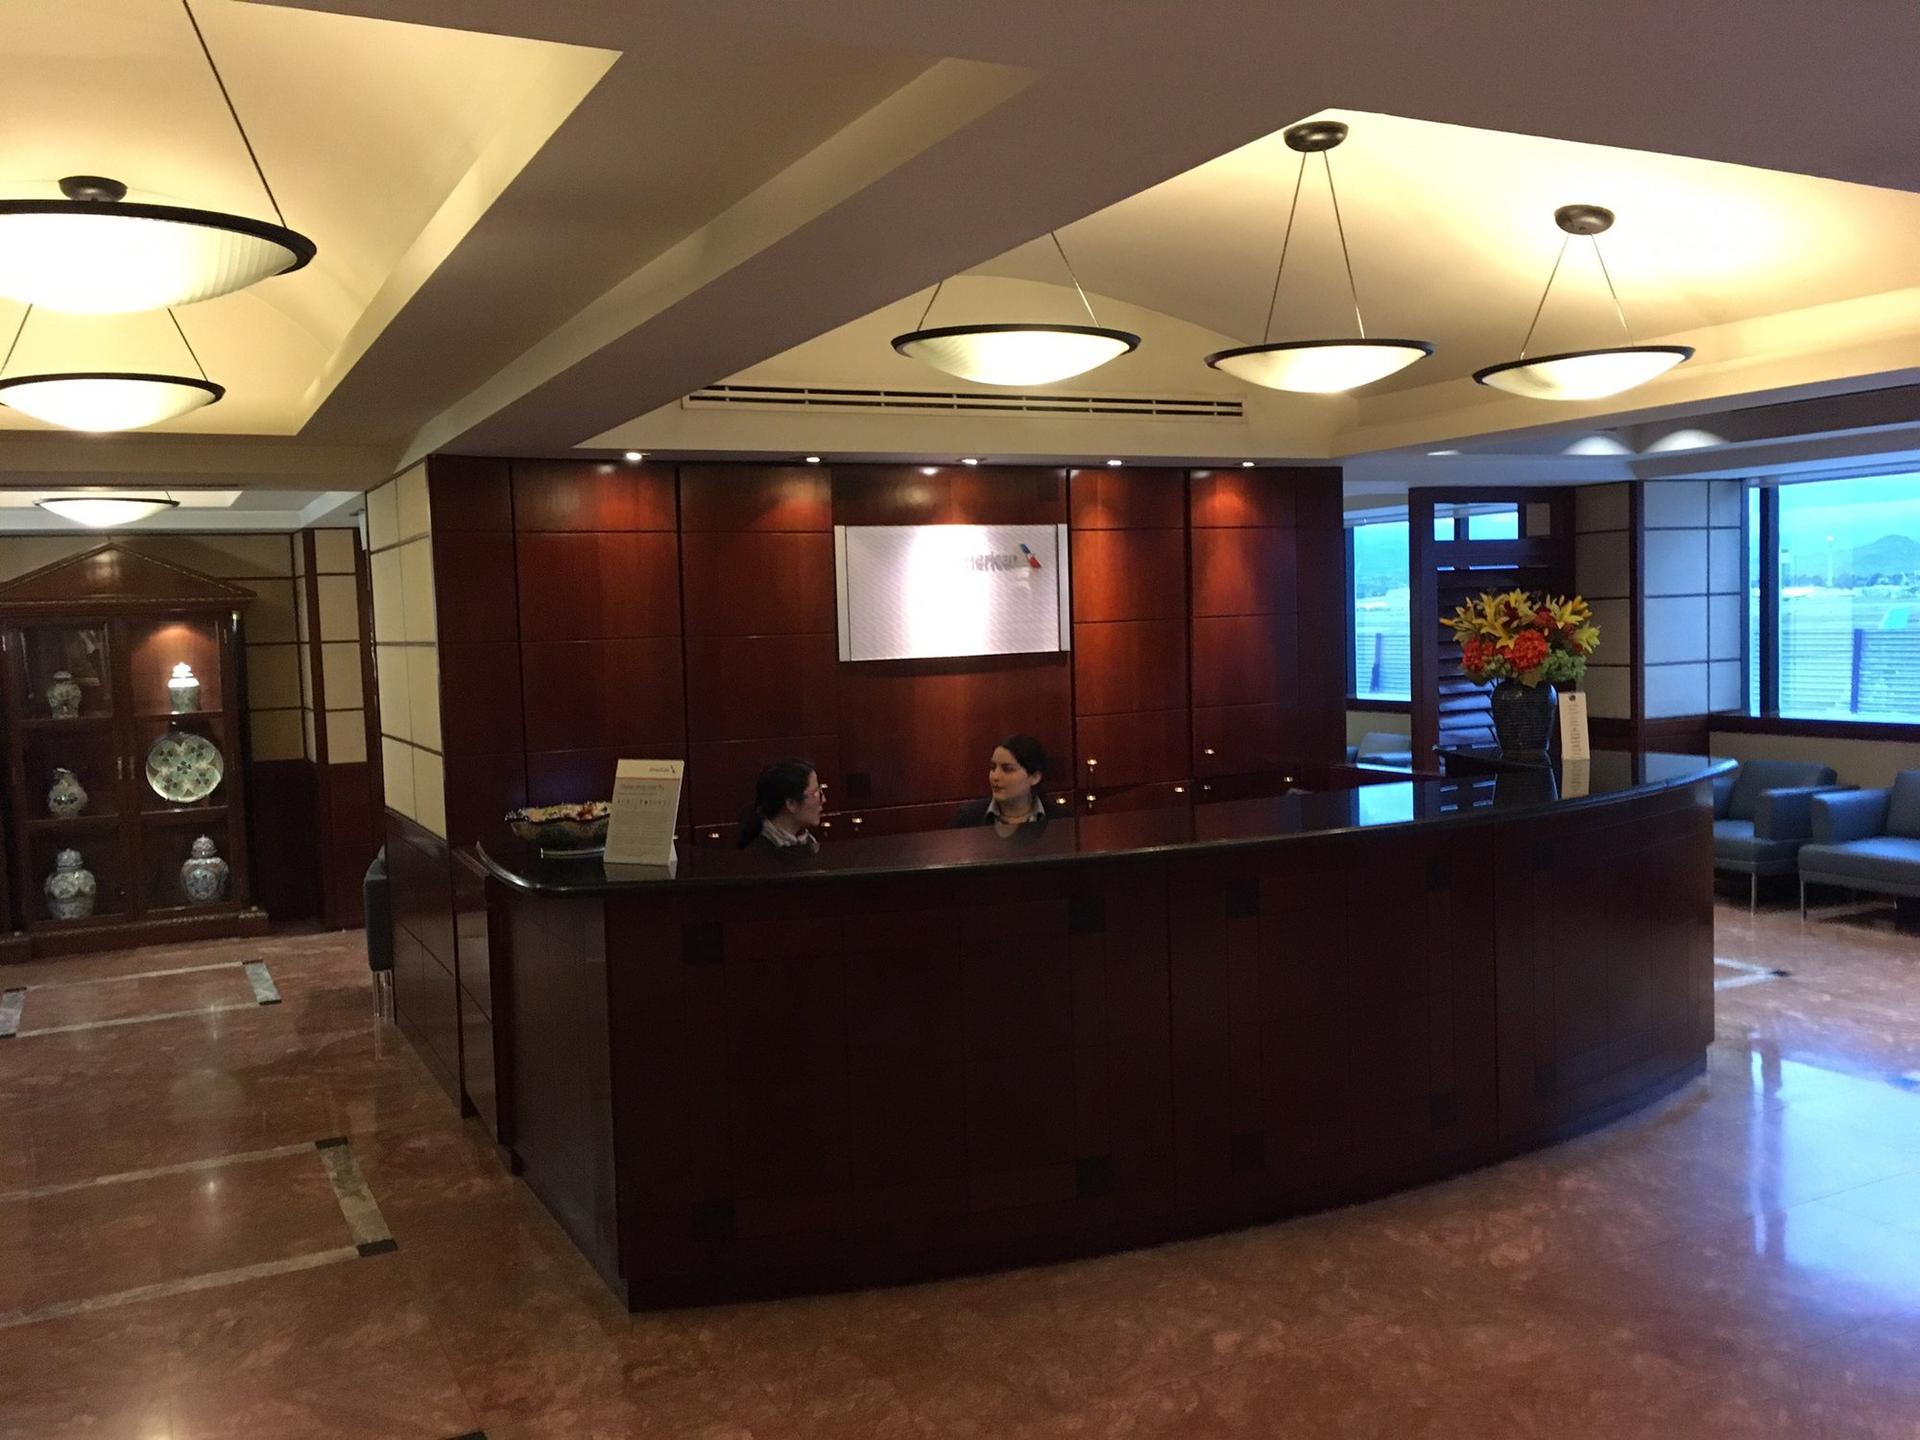 American Airlines Admirals Club image 19 of 32